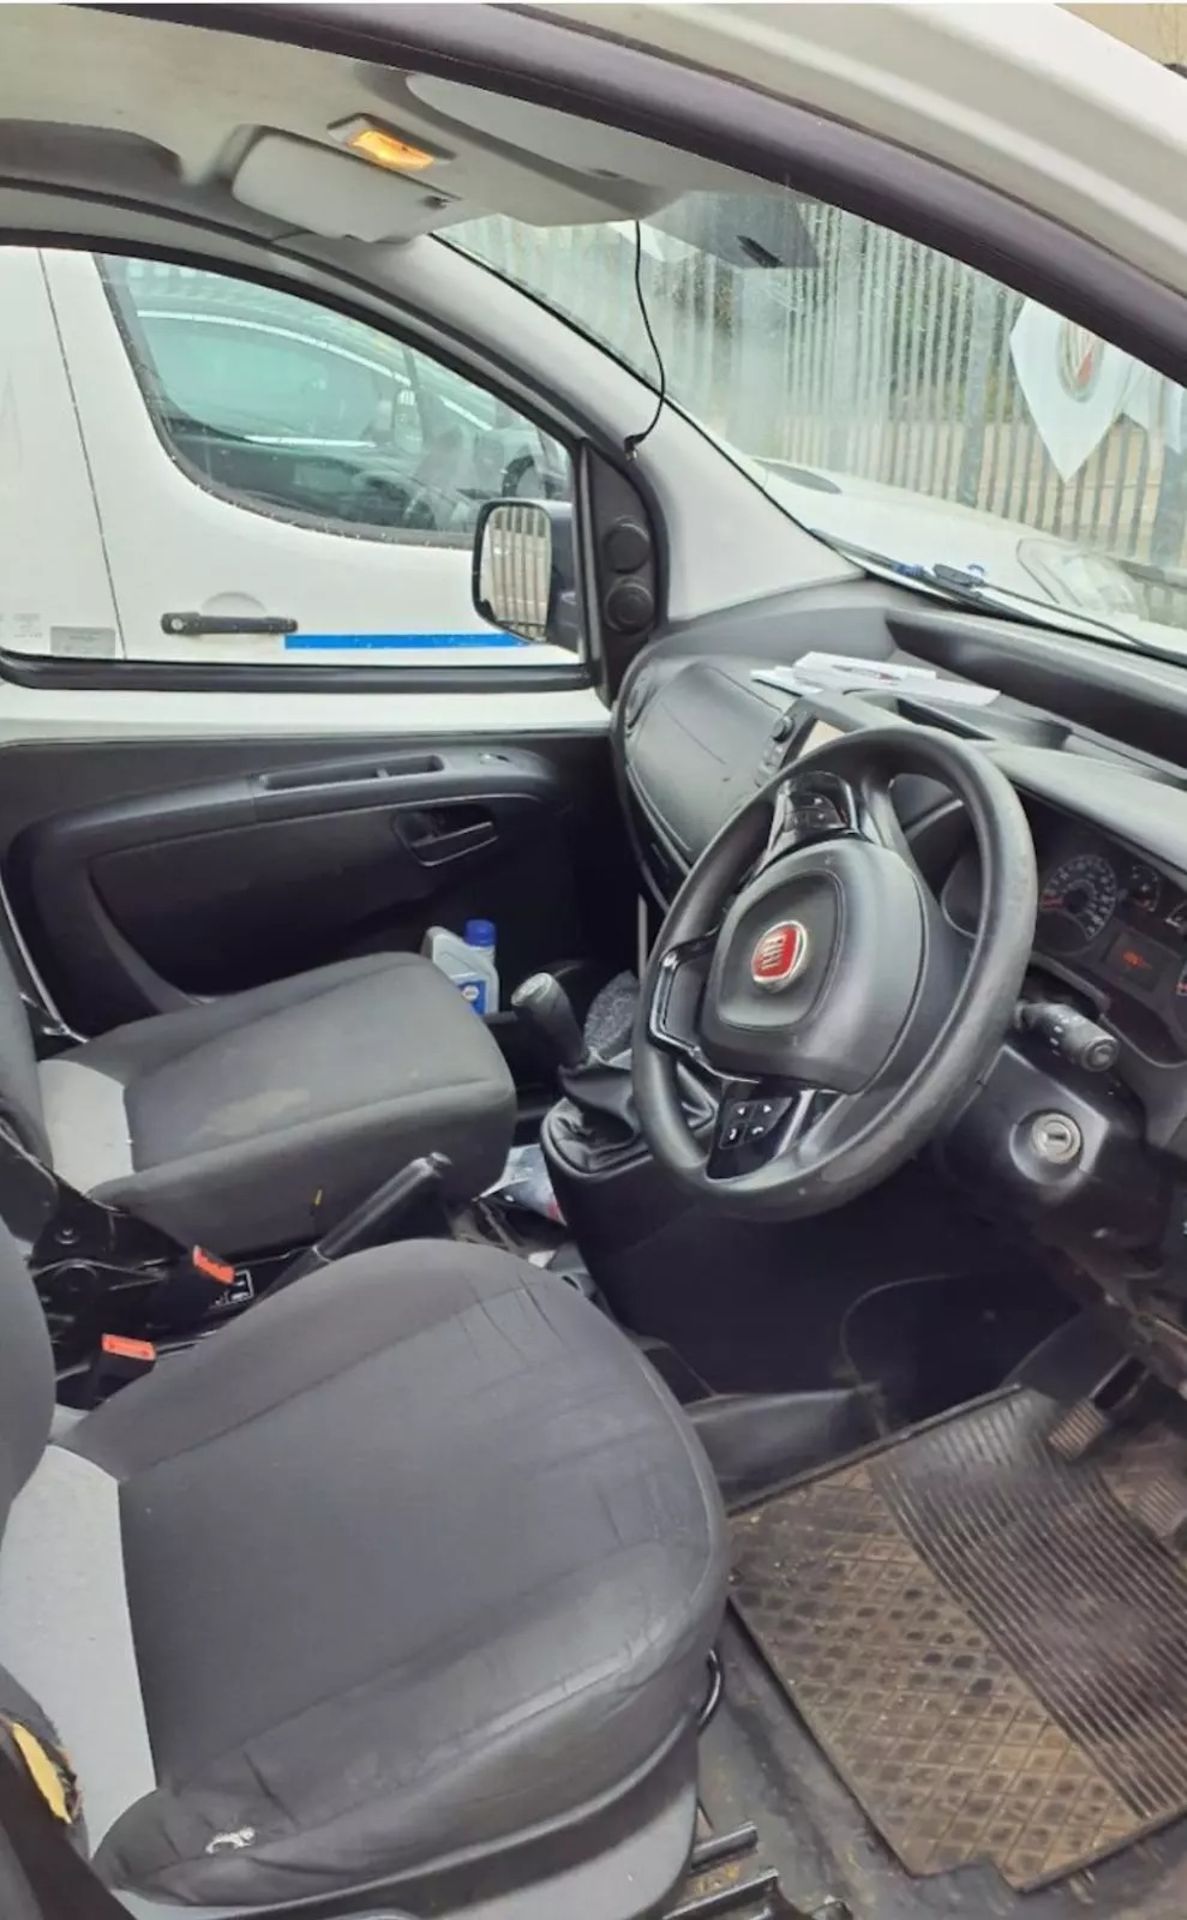 2019 FIAT FIORINO HDI VAN - 1 OWNER, SOLD AS NON-RUNNER, V5 LOG BOOK PRESENT (SPARES OR REPAIRS) - Image 4 of 7